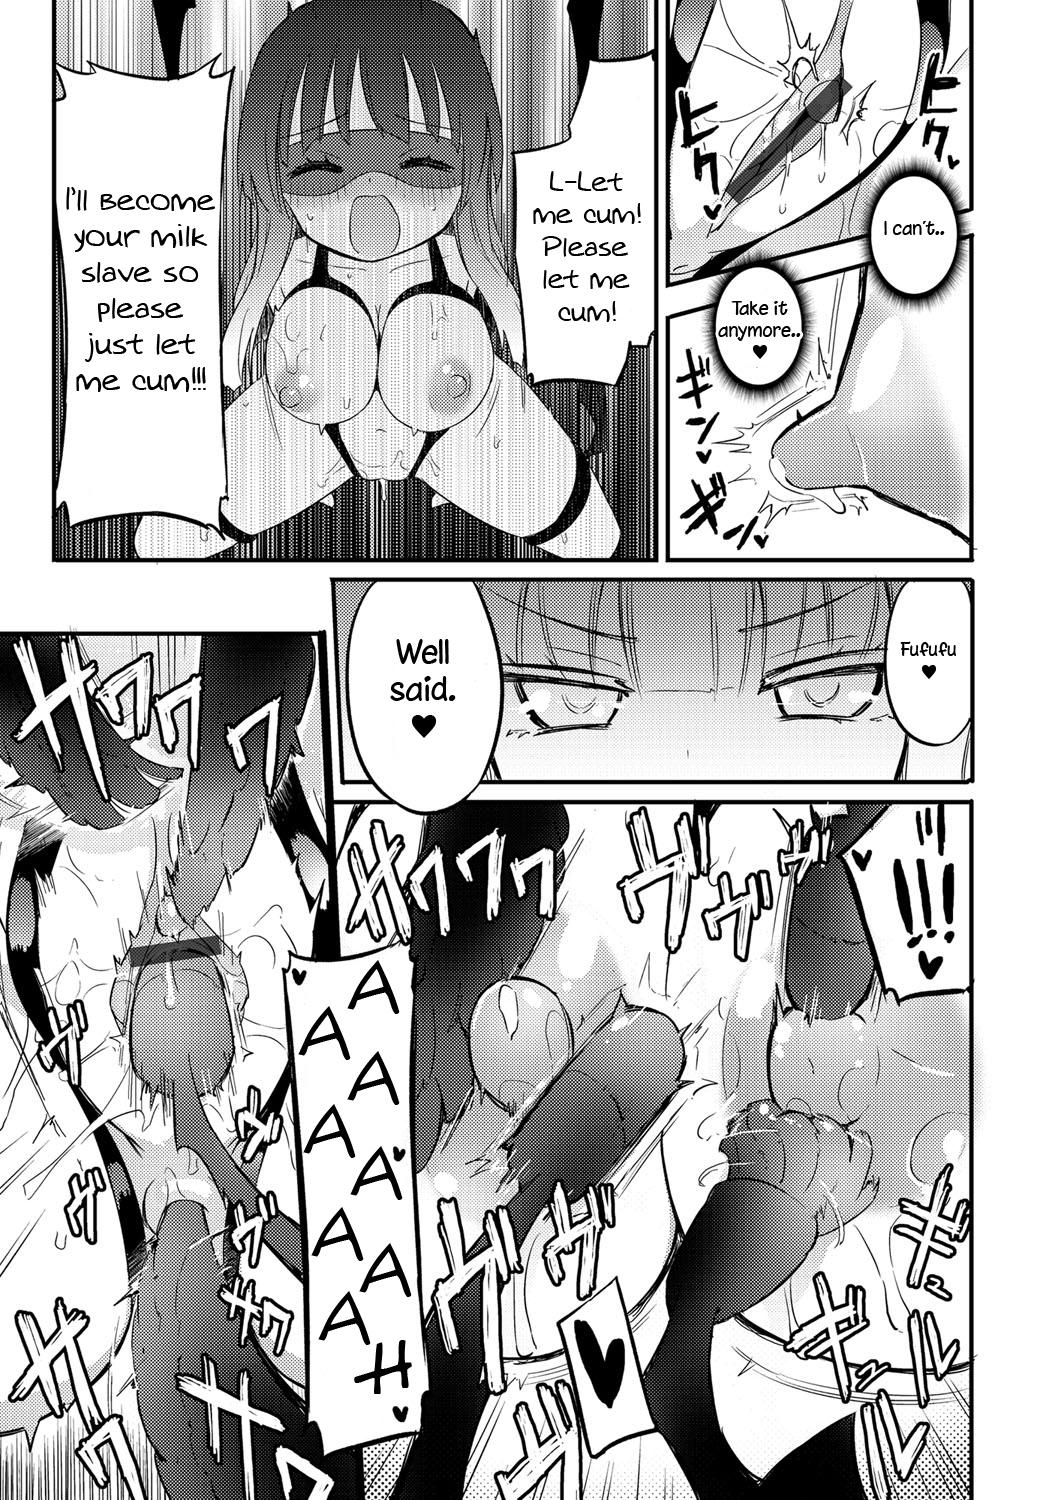 Screaming Milky Succubus Lyli EX | Milky Succubus Lilly EX Italian - Page 11